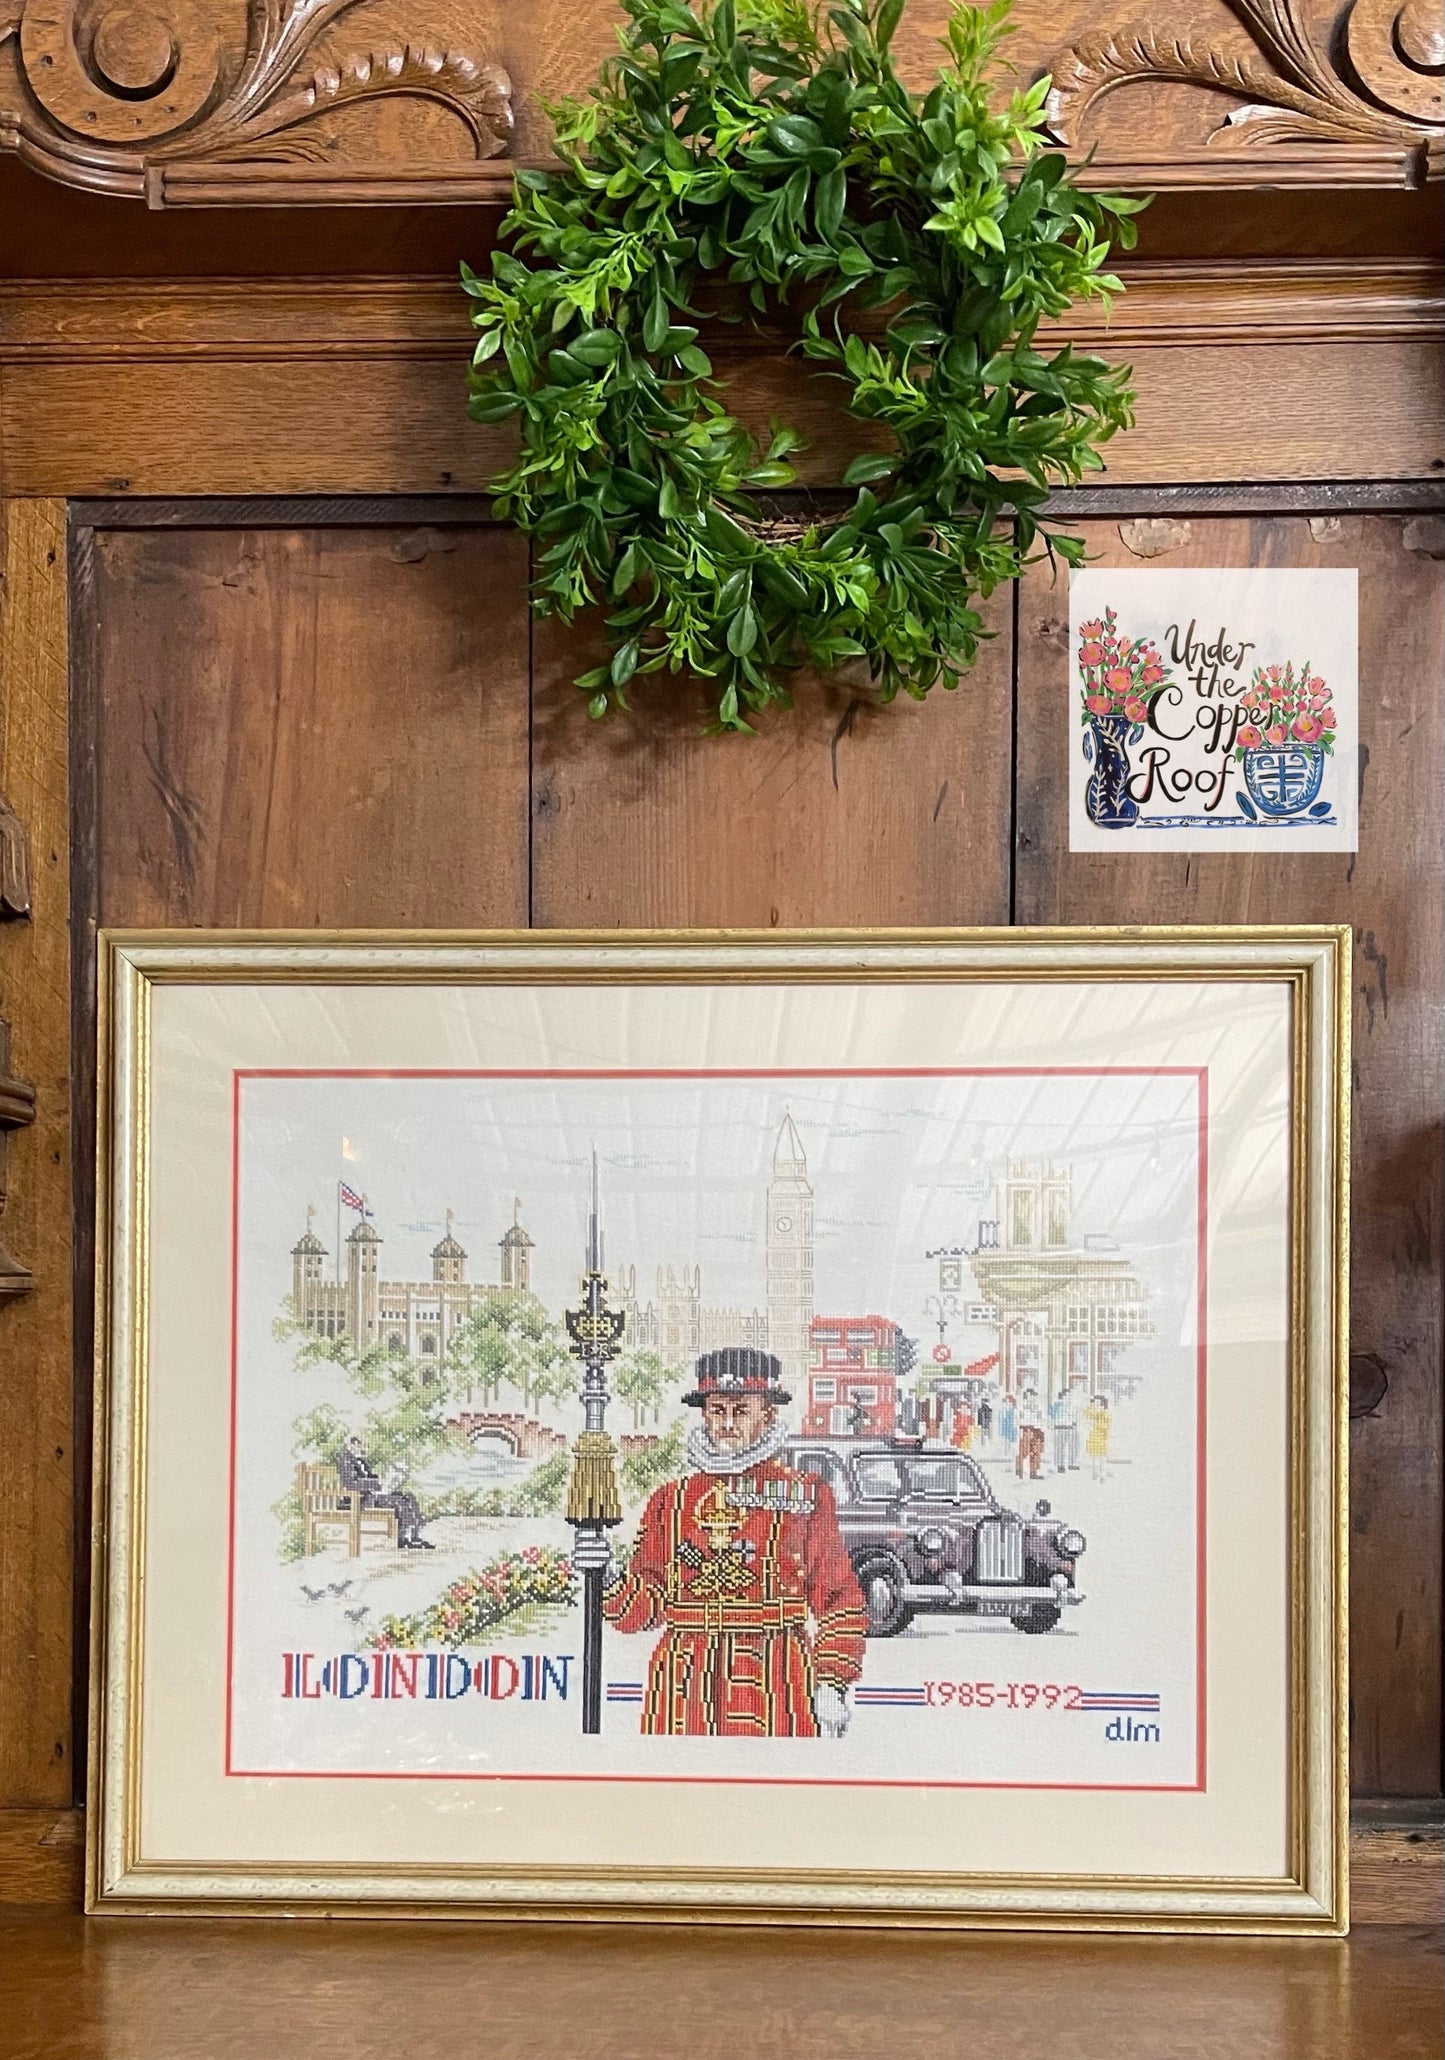 Vintage London Needlepoint Wall Hanging, Original Art, One of a Kind Piece